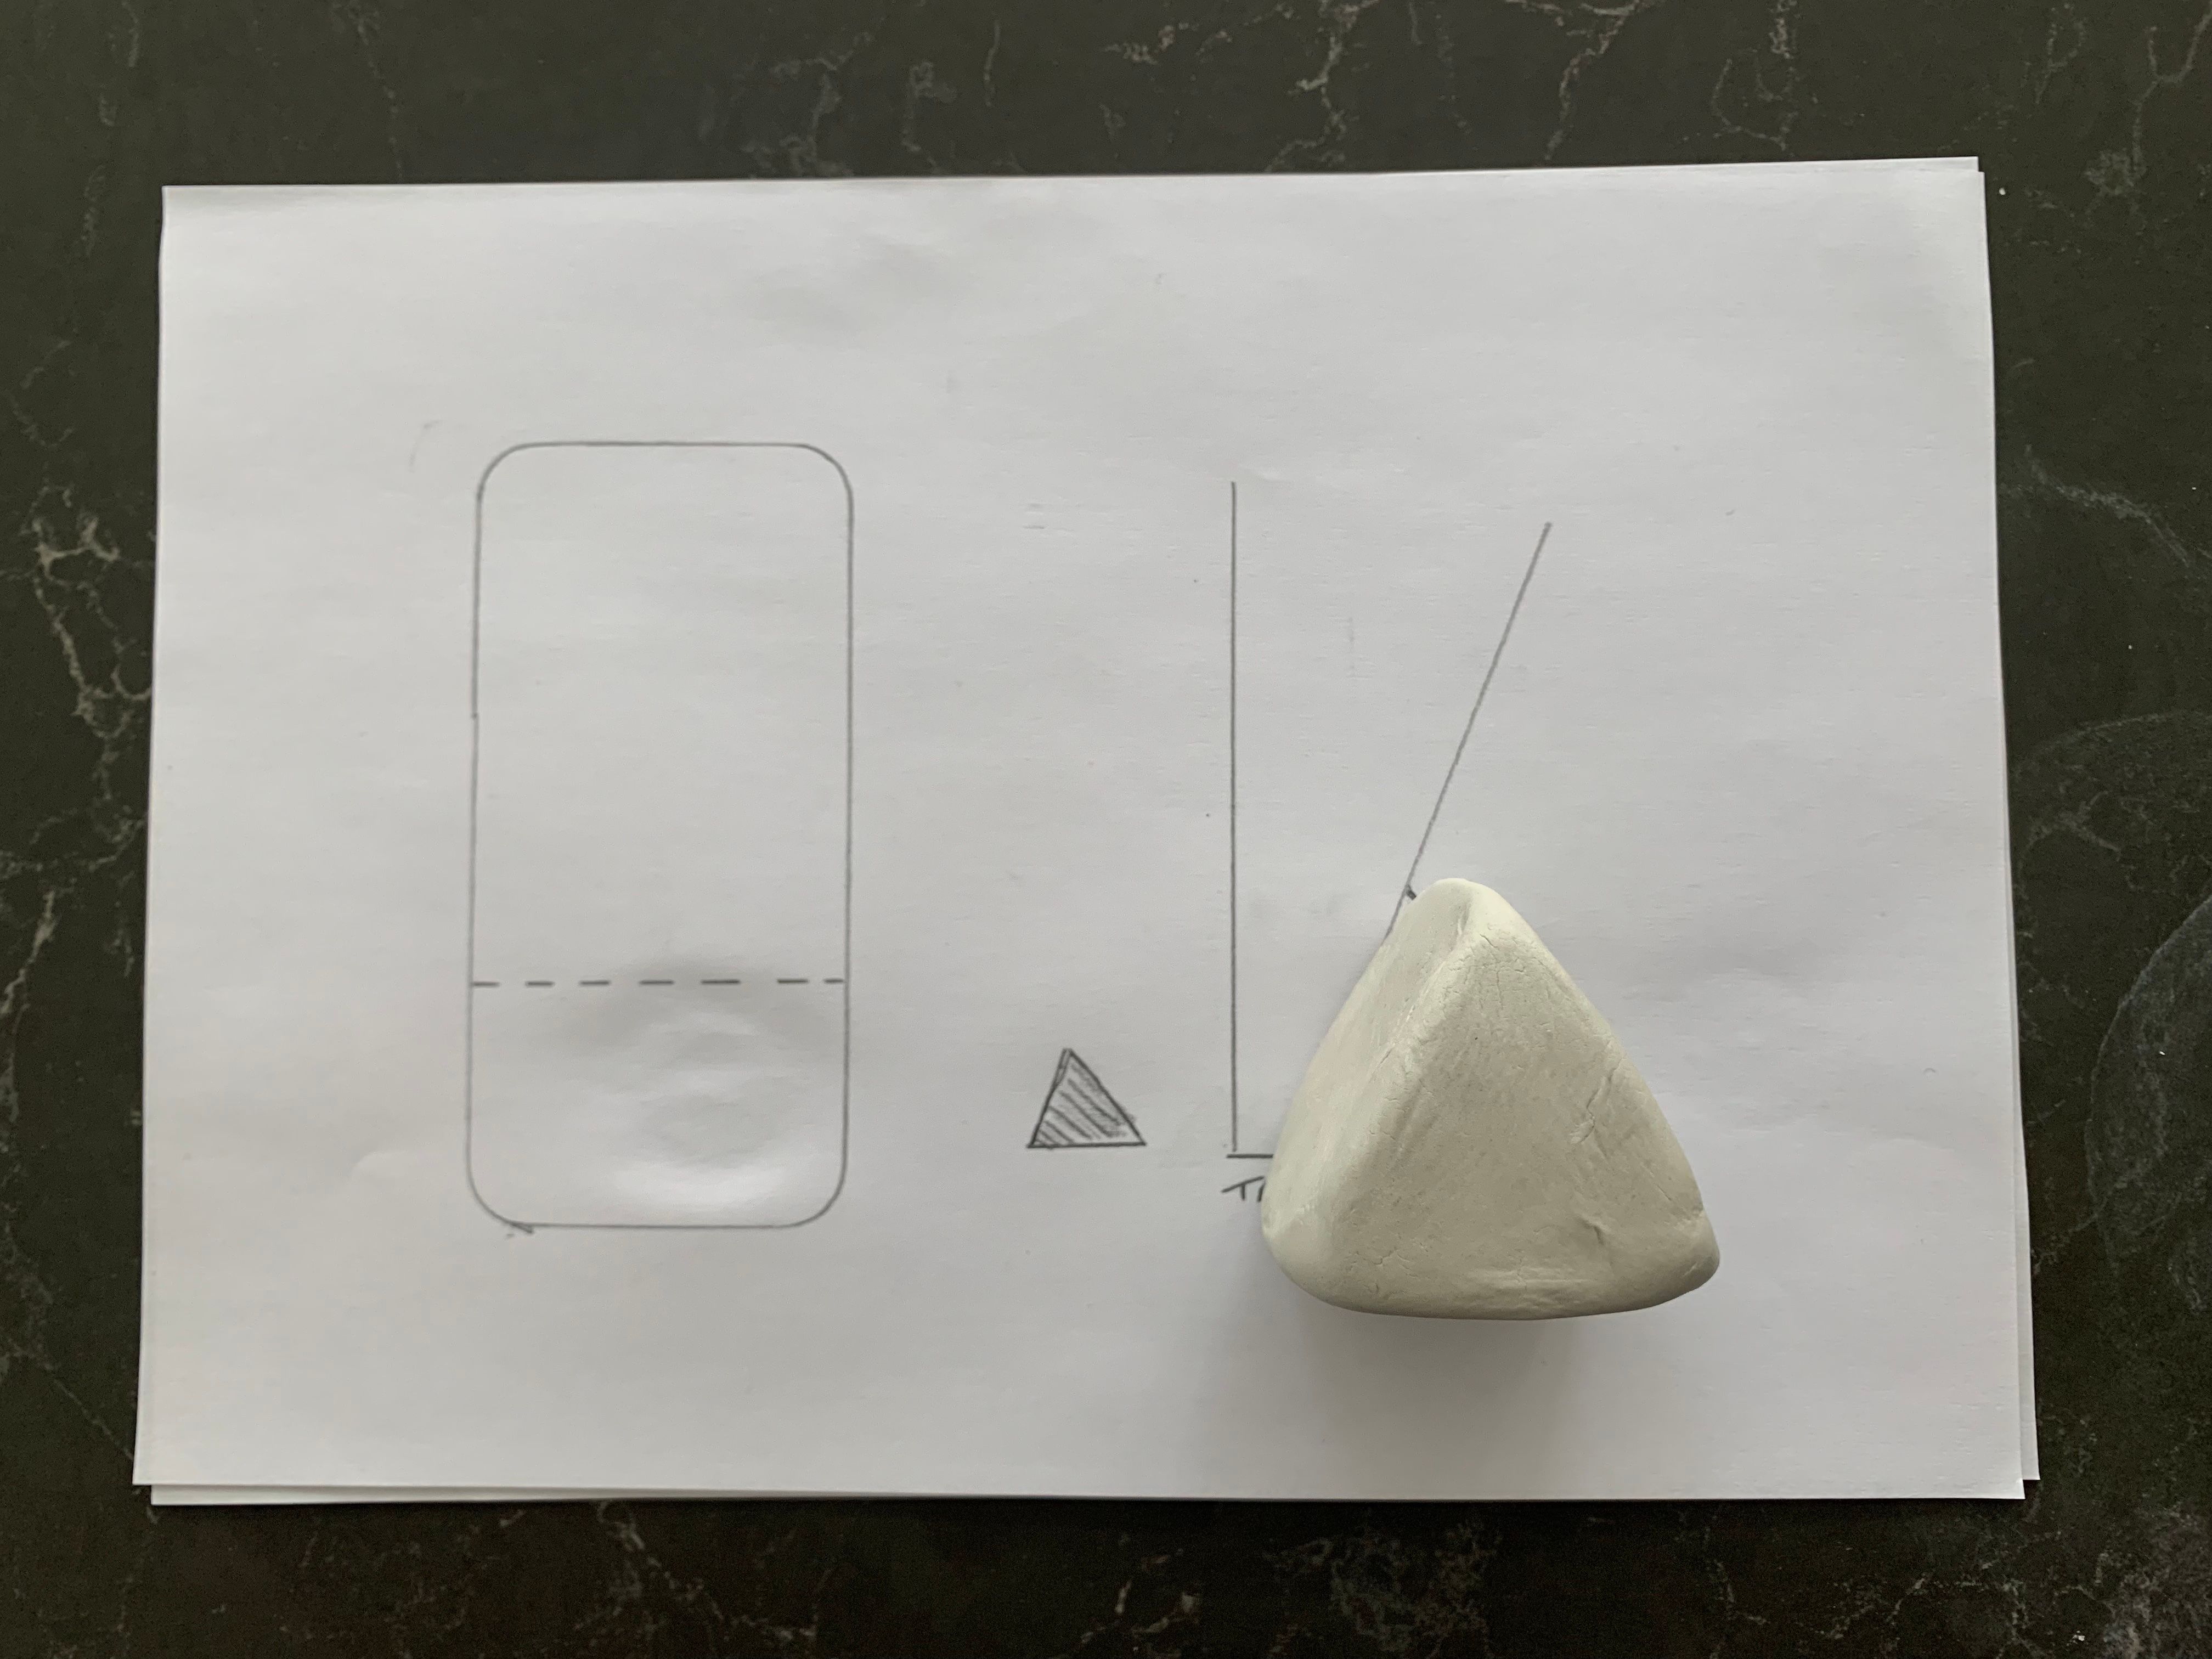 A triangle shaped piece of clay compared against the phone outline on paper